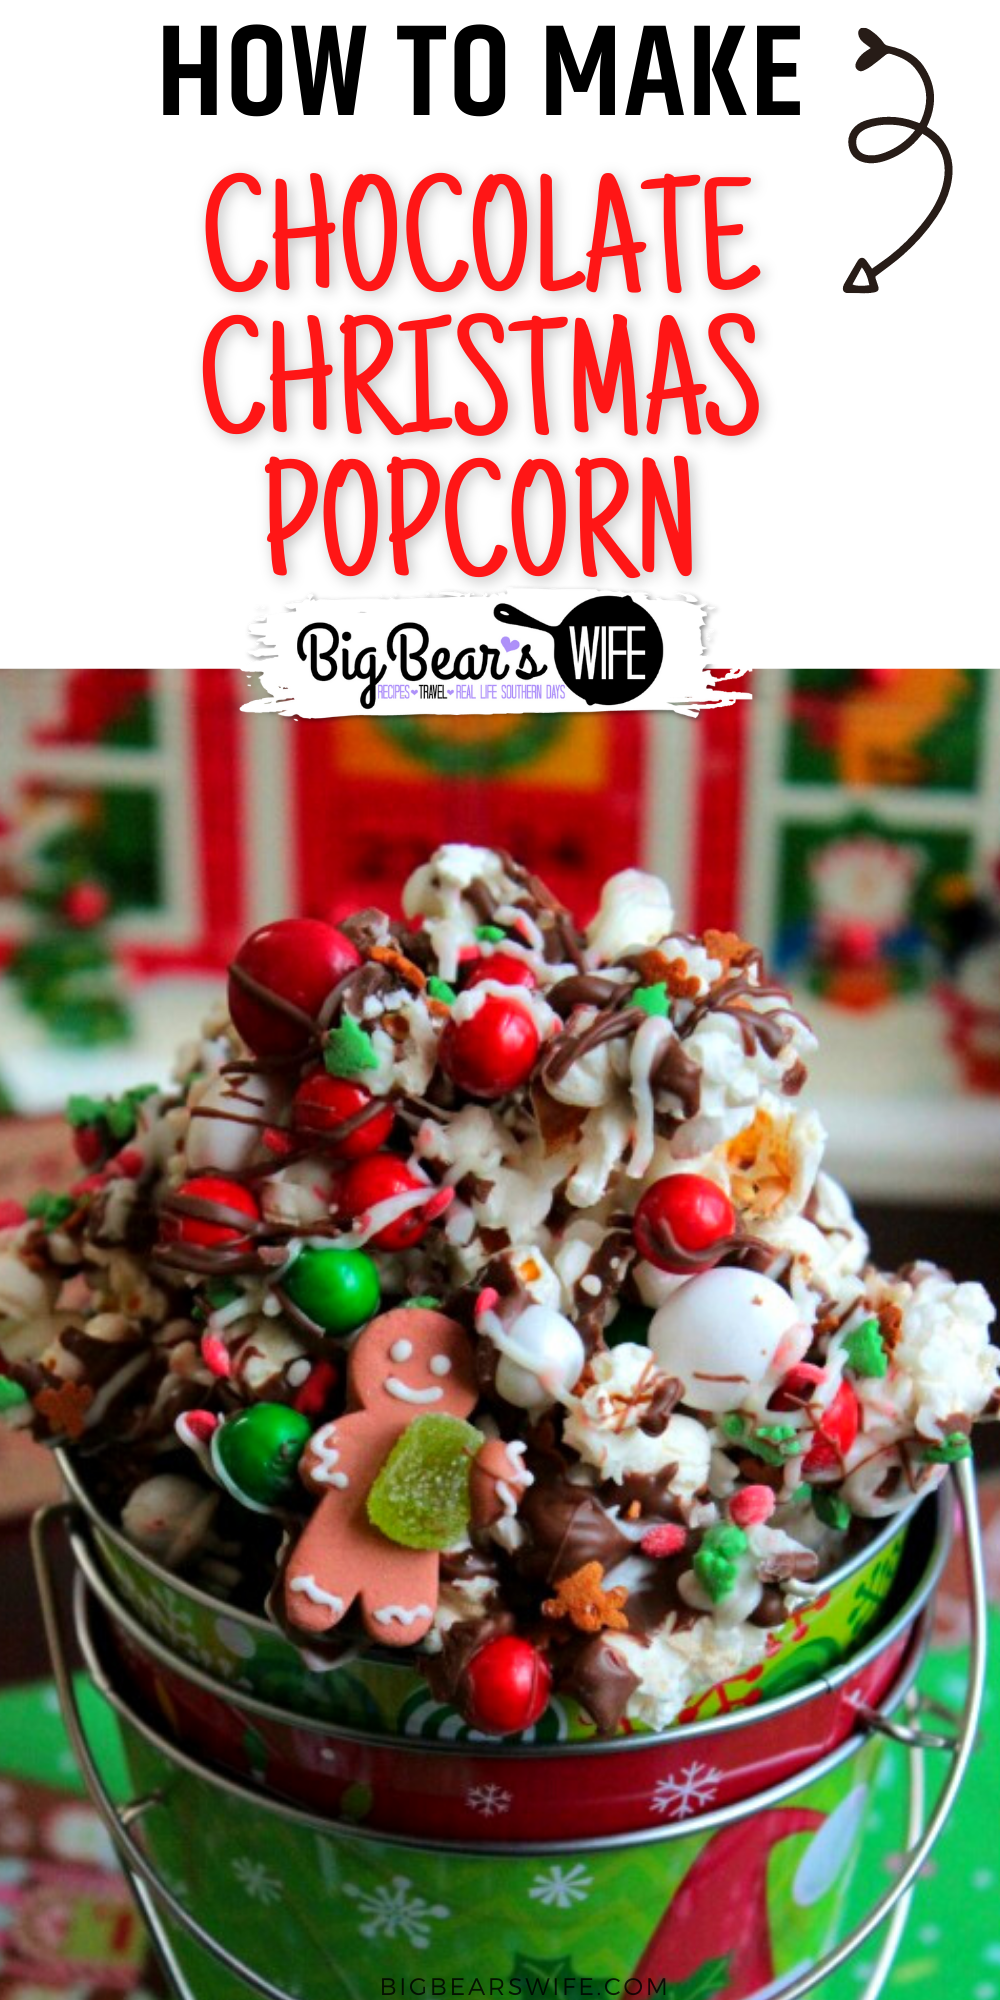  Drizzled with chocolate and sprinkled with chocolate candies and Christmas sprinkles, this Chocolate Christmas popcorn is the perfect festive treat to make at home with the kids or to package up for neighbor gifts! via @bigbearswife